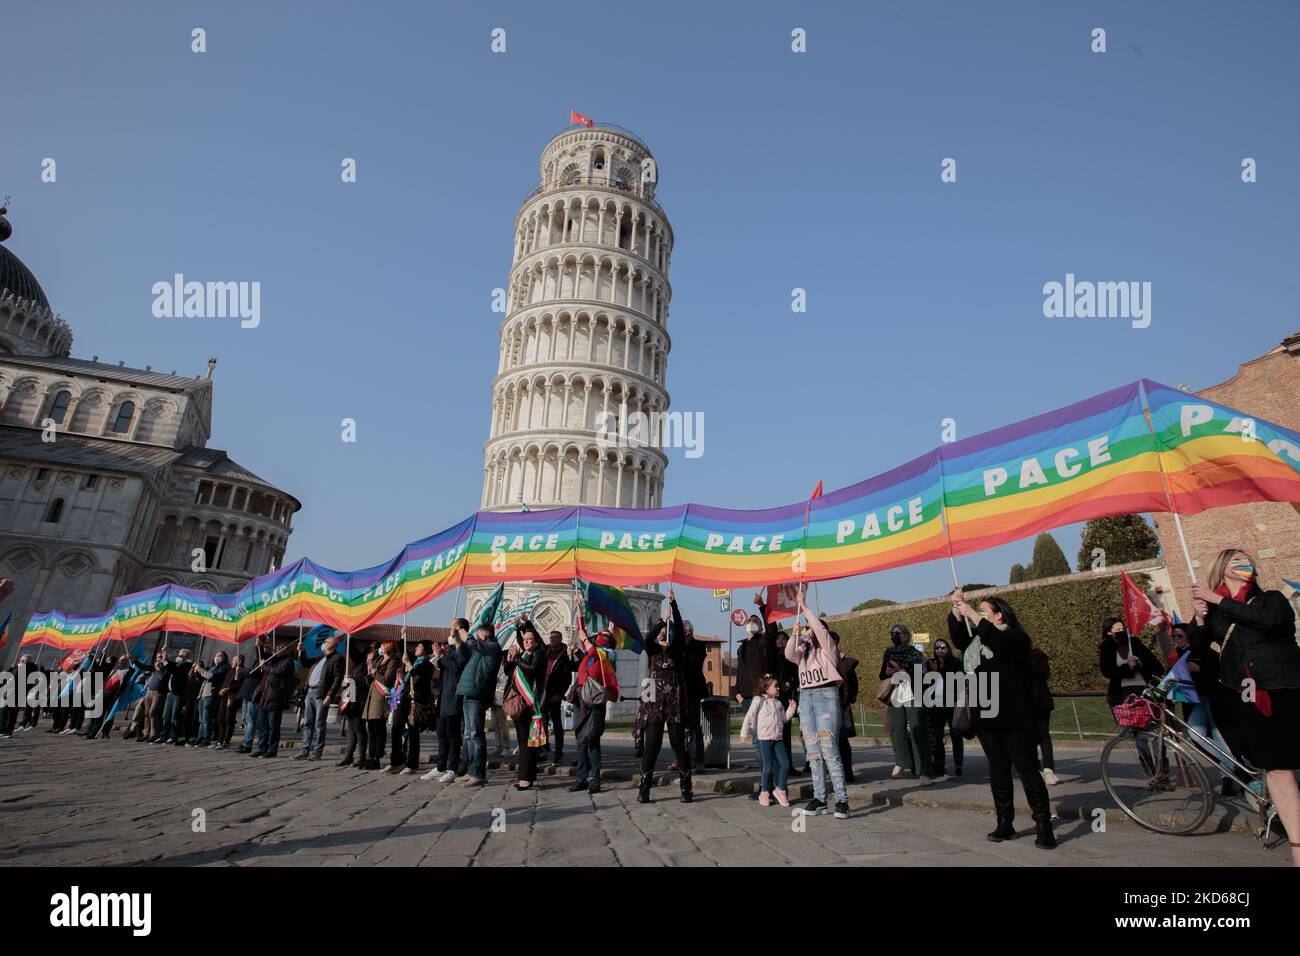 A Flash Mob for Peace in Pisa, Italy, on March 28, 2022. CGIL, CISL and UIL organised a flash mob to call for an immediate ceasefire for the war in Ukraine that flared up on 24 February with the invasion by Russia. Italy's major trade unions met under the famous leaning tower of Pisa for a flash mob with peace flags. (Photo by Enrico Mattia Del Punta/NurPhoto) Stock Photo